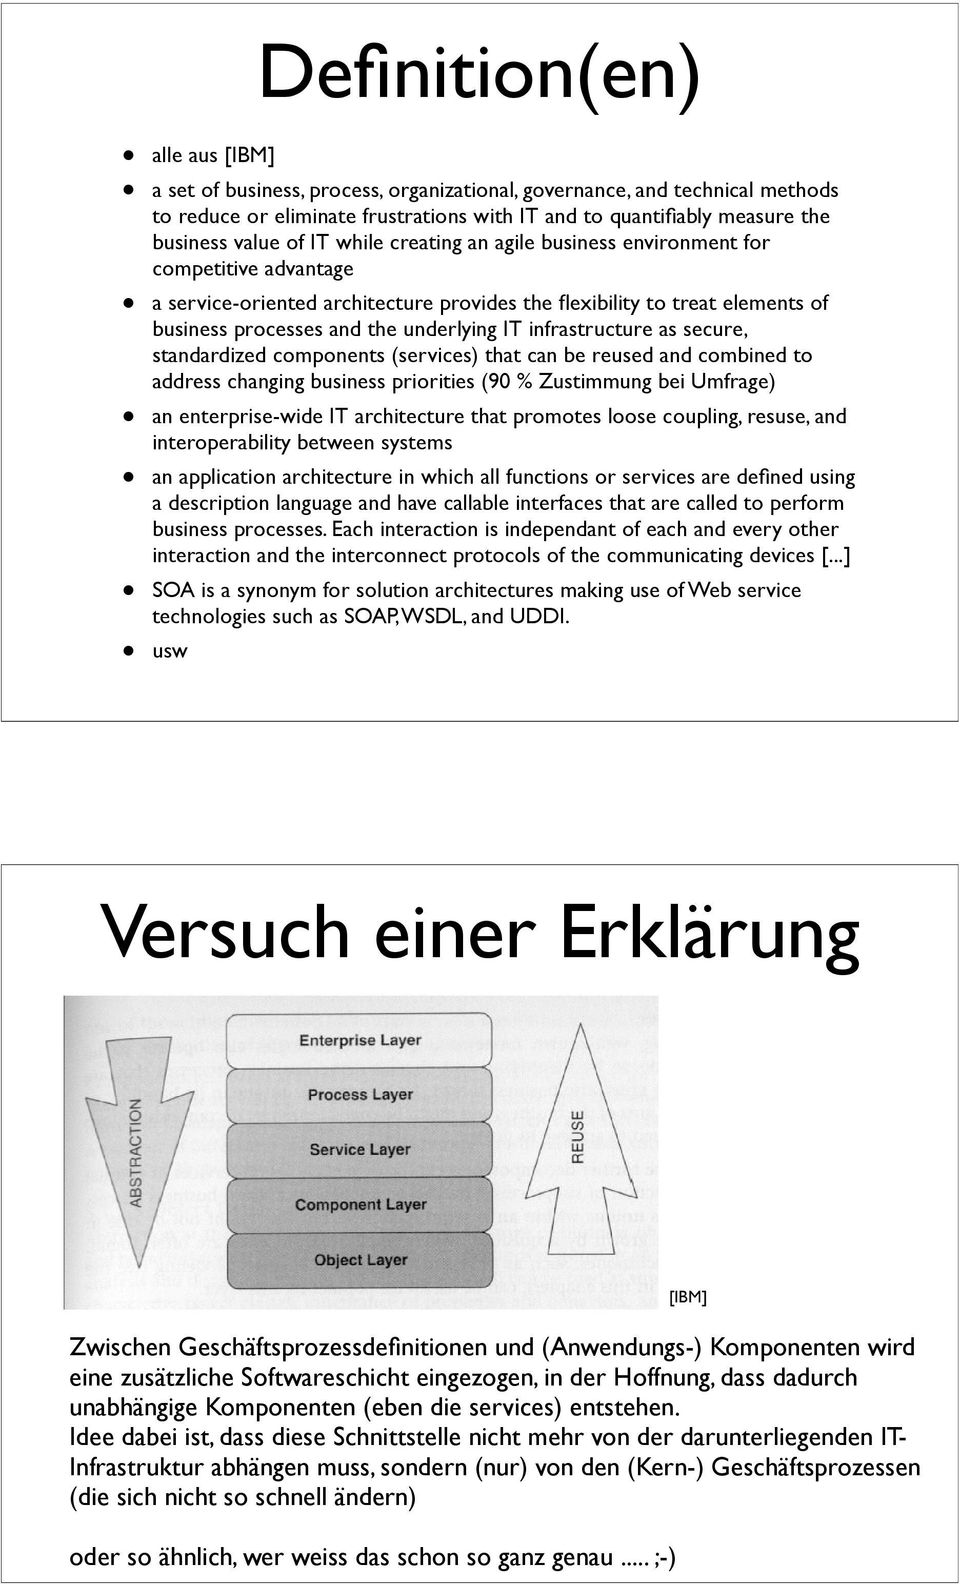 infrastructure as secure, standardized components (services) that can be reused and combined to address changing business priorities (90 % Zustimmung bei Umfrage) an enterprise-wide IT architecture